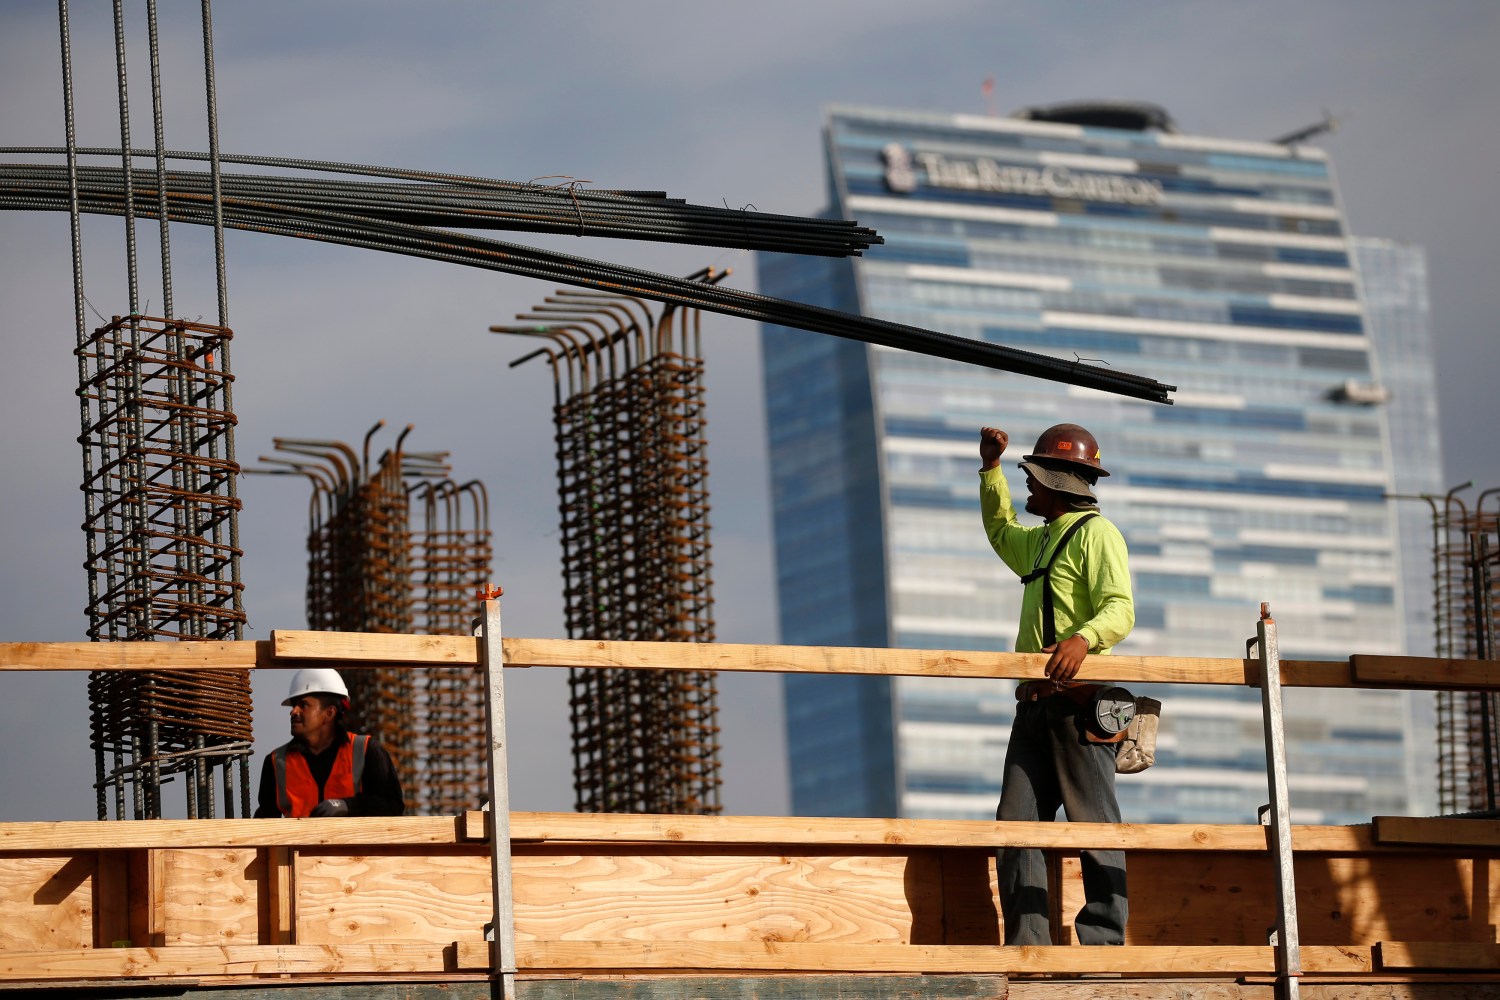 Men work on a construction site for a luxury apartment complex in downtown Los Angeles, California March 17, 2015. U.S. housing starts plunged to their lowest level in a year in February likely as harsh weather kept building crews at home in the latest indication that the economy hit a soft patch in the first quarter. REUTERS/Lucy Nicholson (UNITED STATES - Tags: REAL ESTATE BUSINESS)